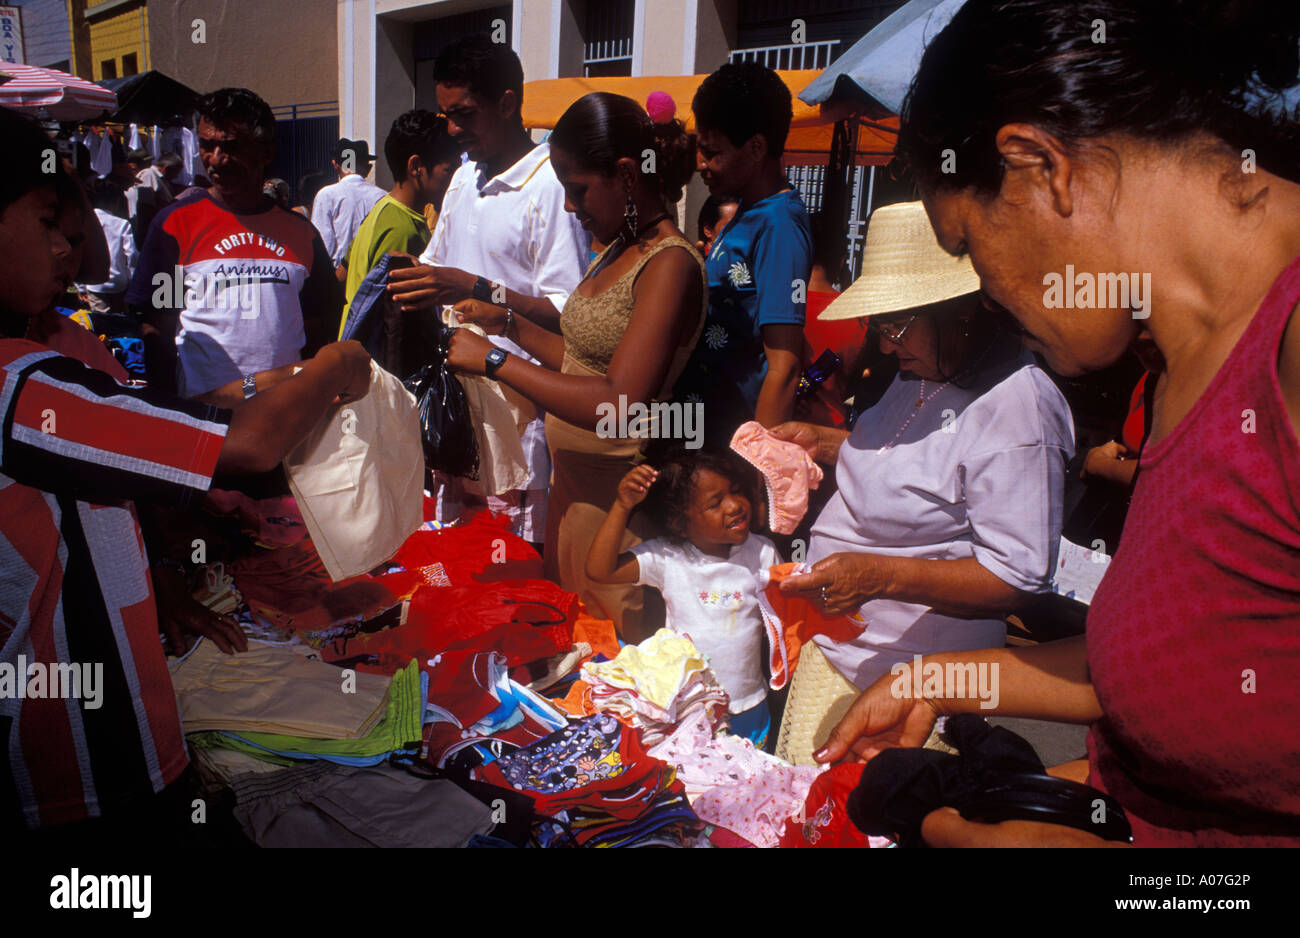 Open-air market, cheap, inexpensive clothes for sale, popular commerce for low income customers at Juazeiro do Norte in Ceara State, Brazil. Stock Photo